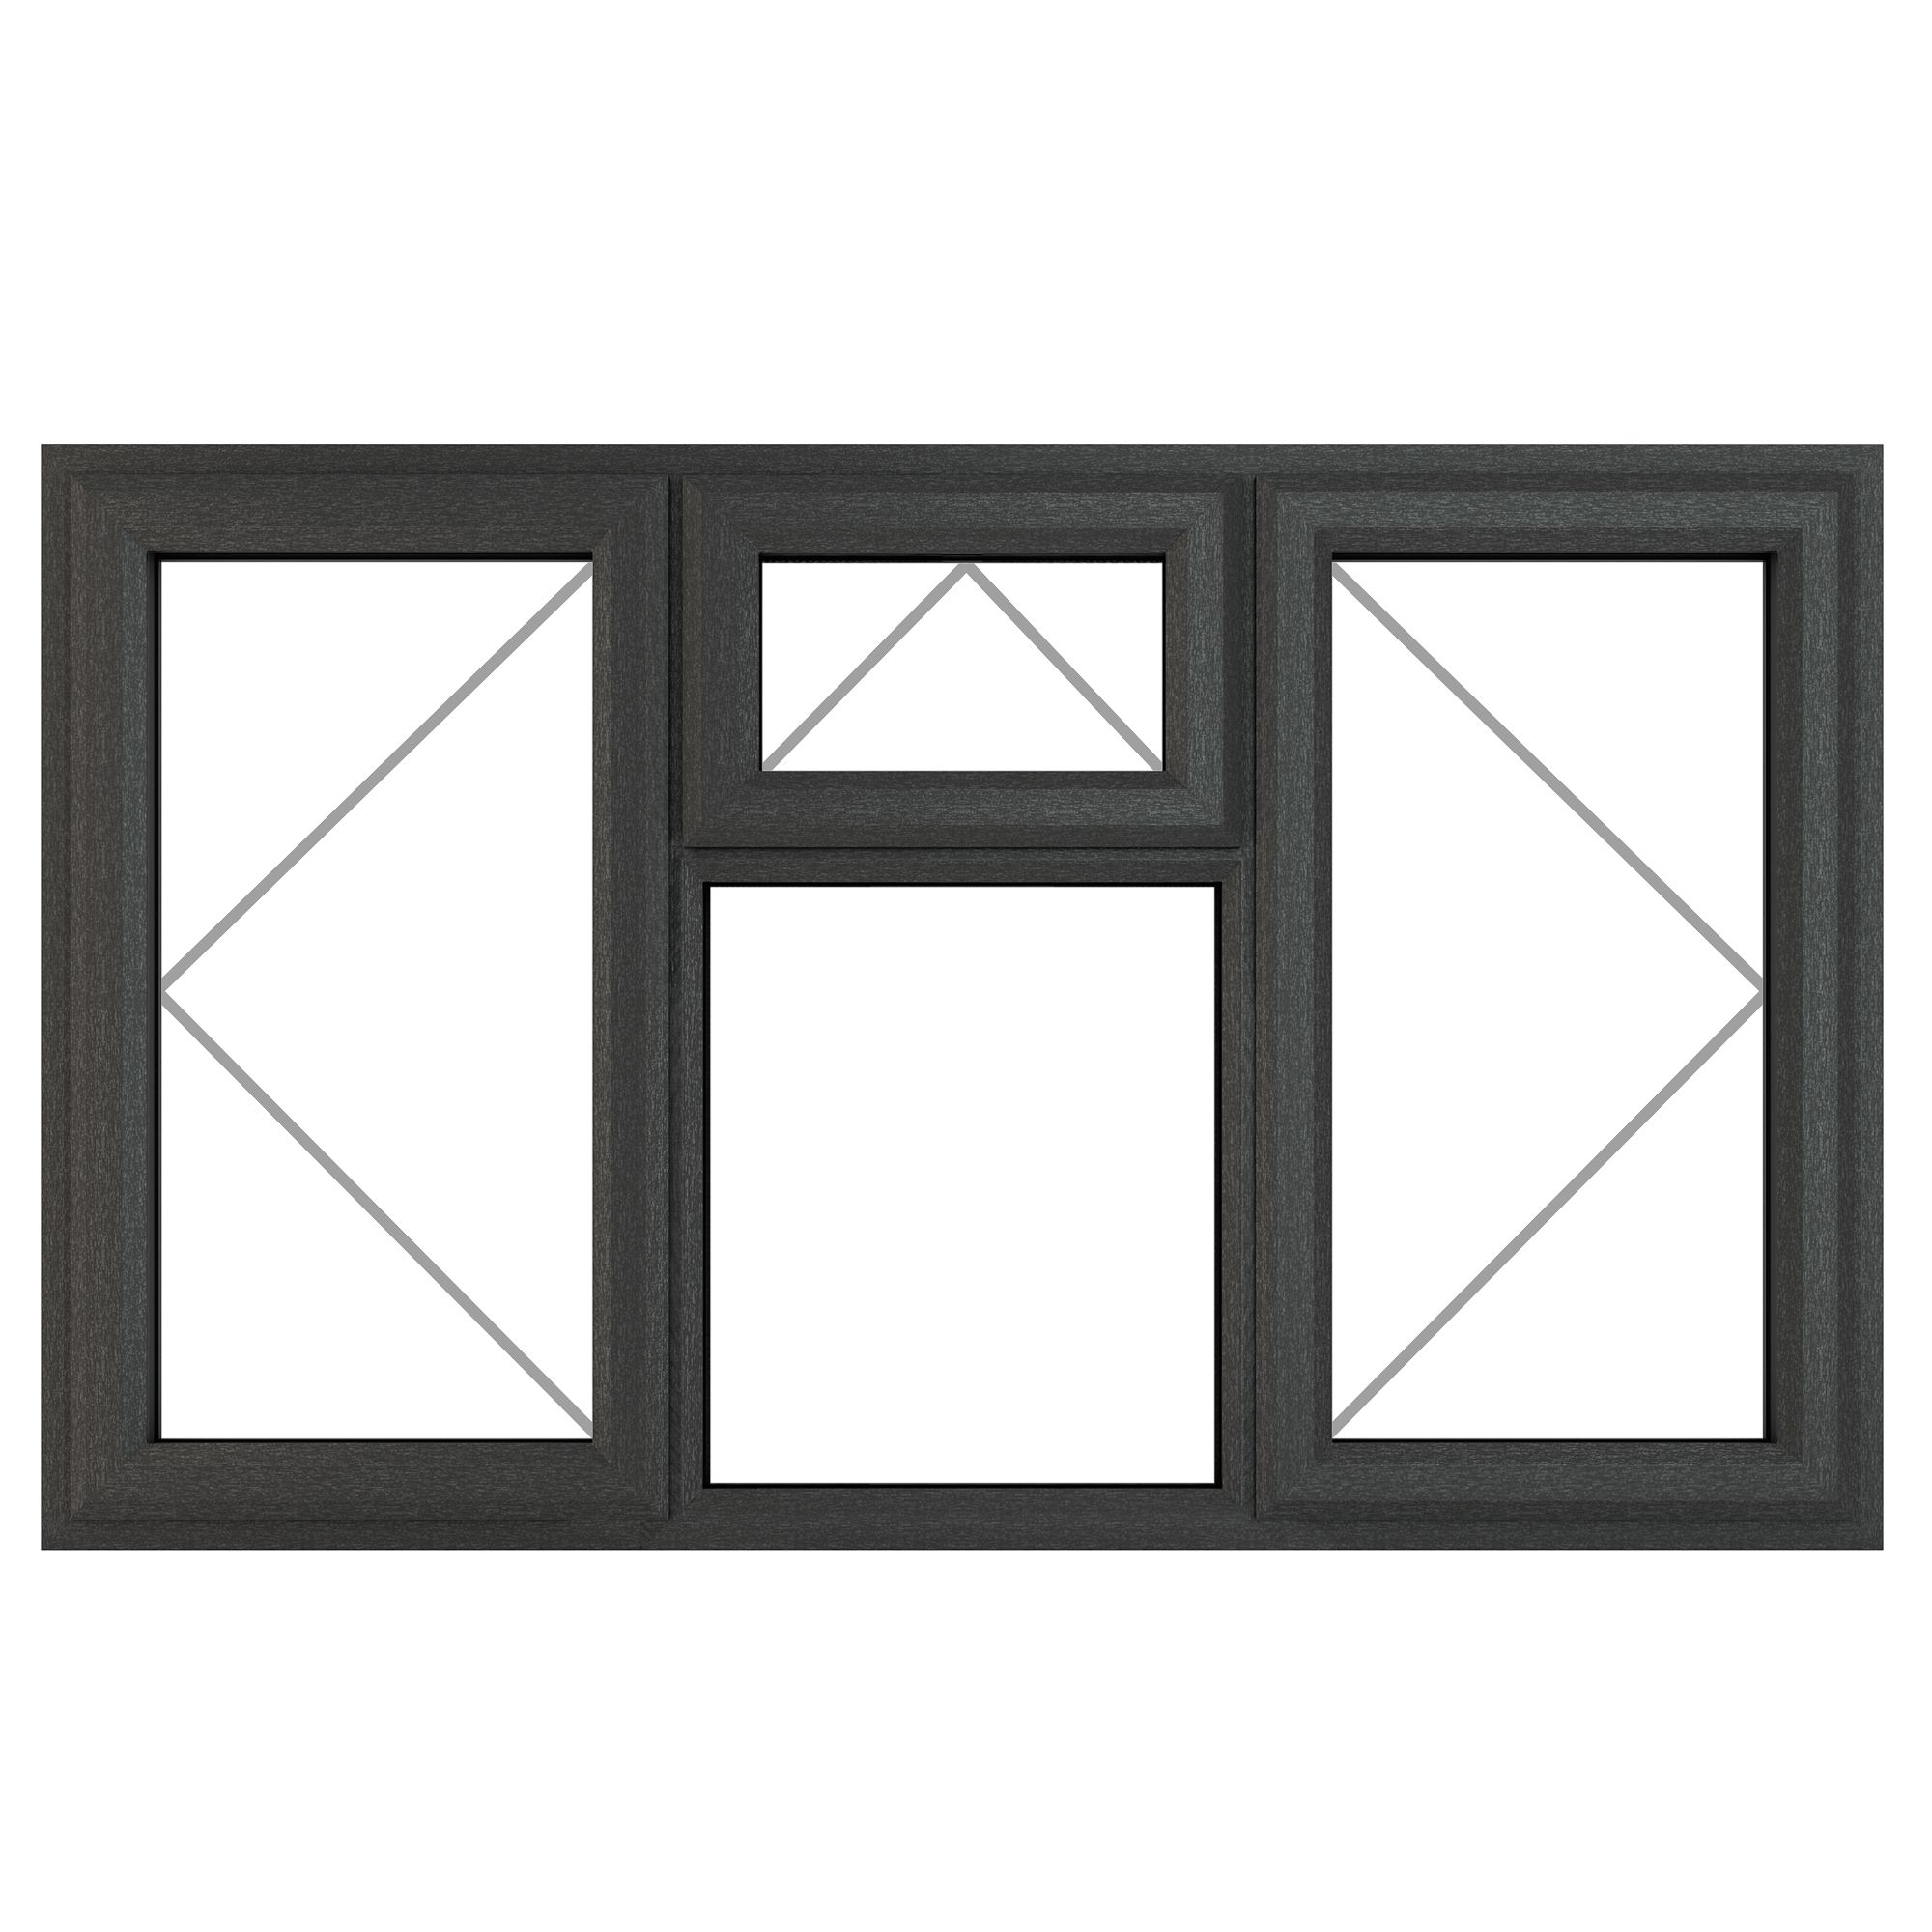 Fortia 4P Clear Glazed Anthracite uPVC LH & RH Side & top hung Window, (H)1190mm (W)1770mm